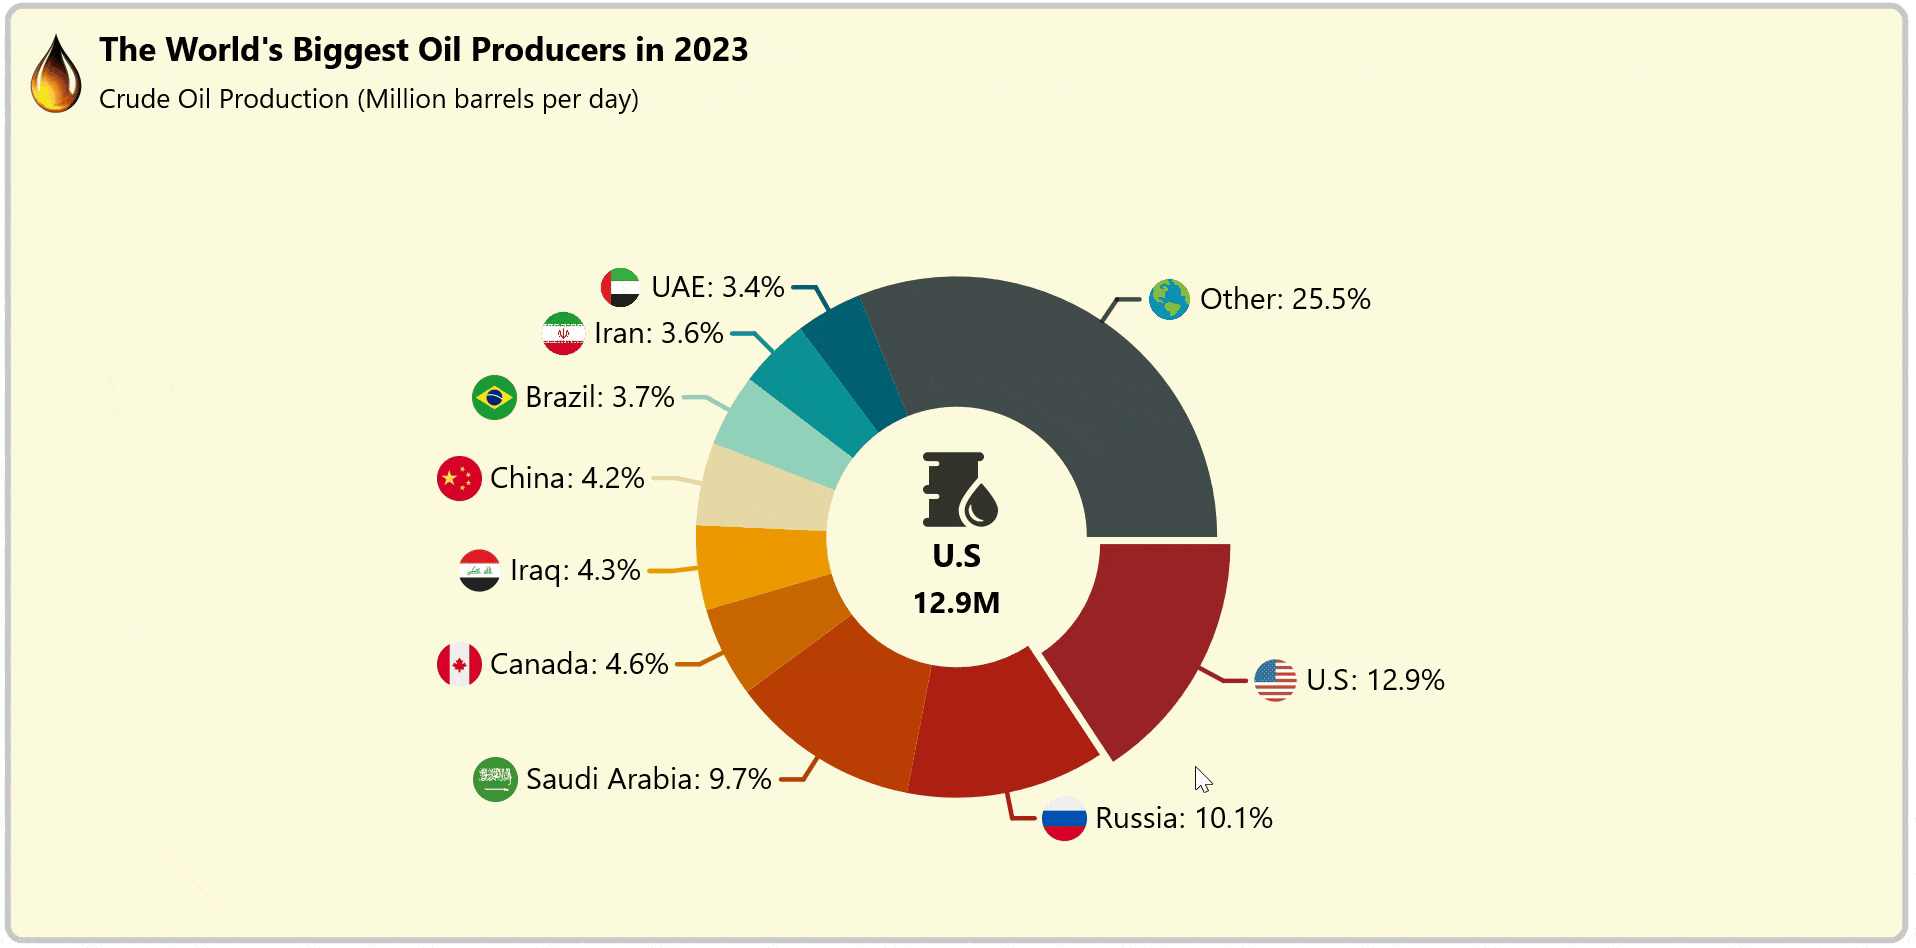 Visualizing the world’s biggest oil producers’ data using the Syncfusion .NET MAUI Doughnut Chart